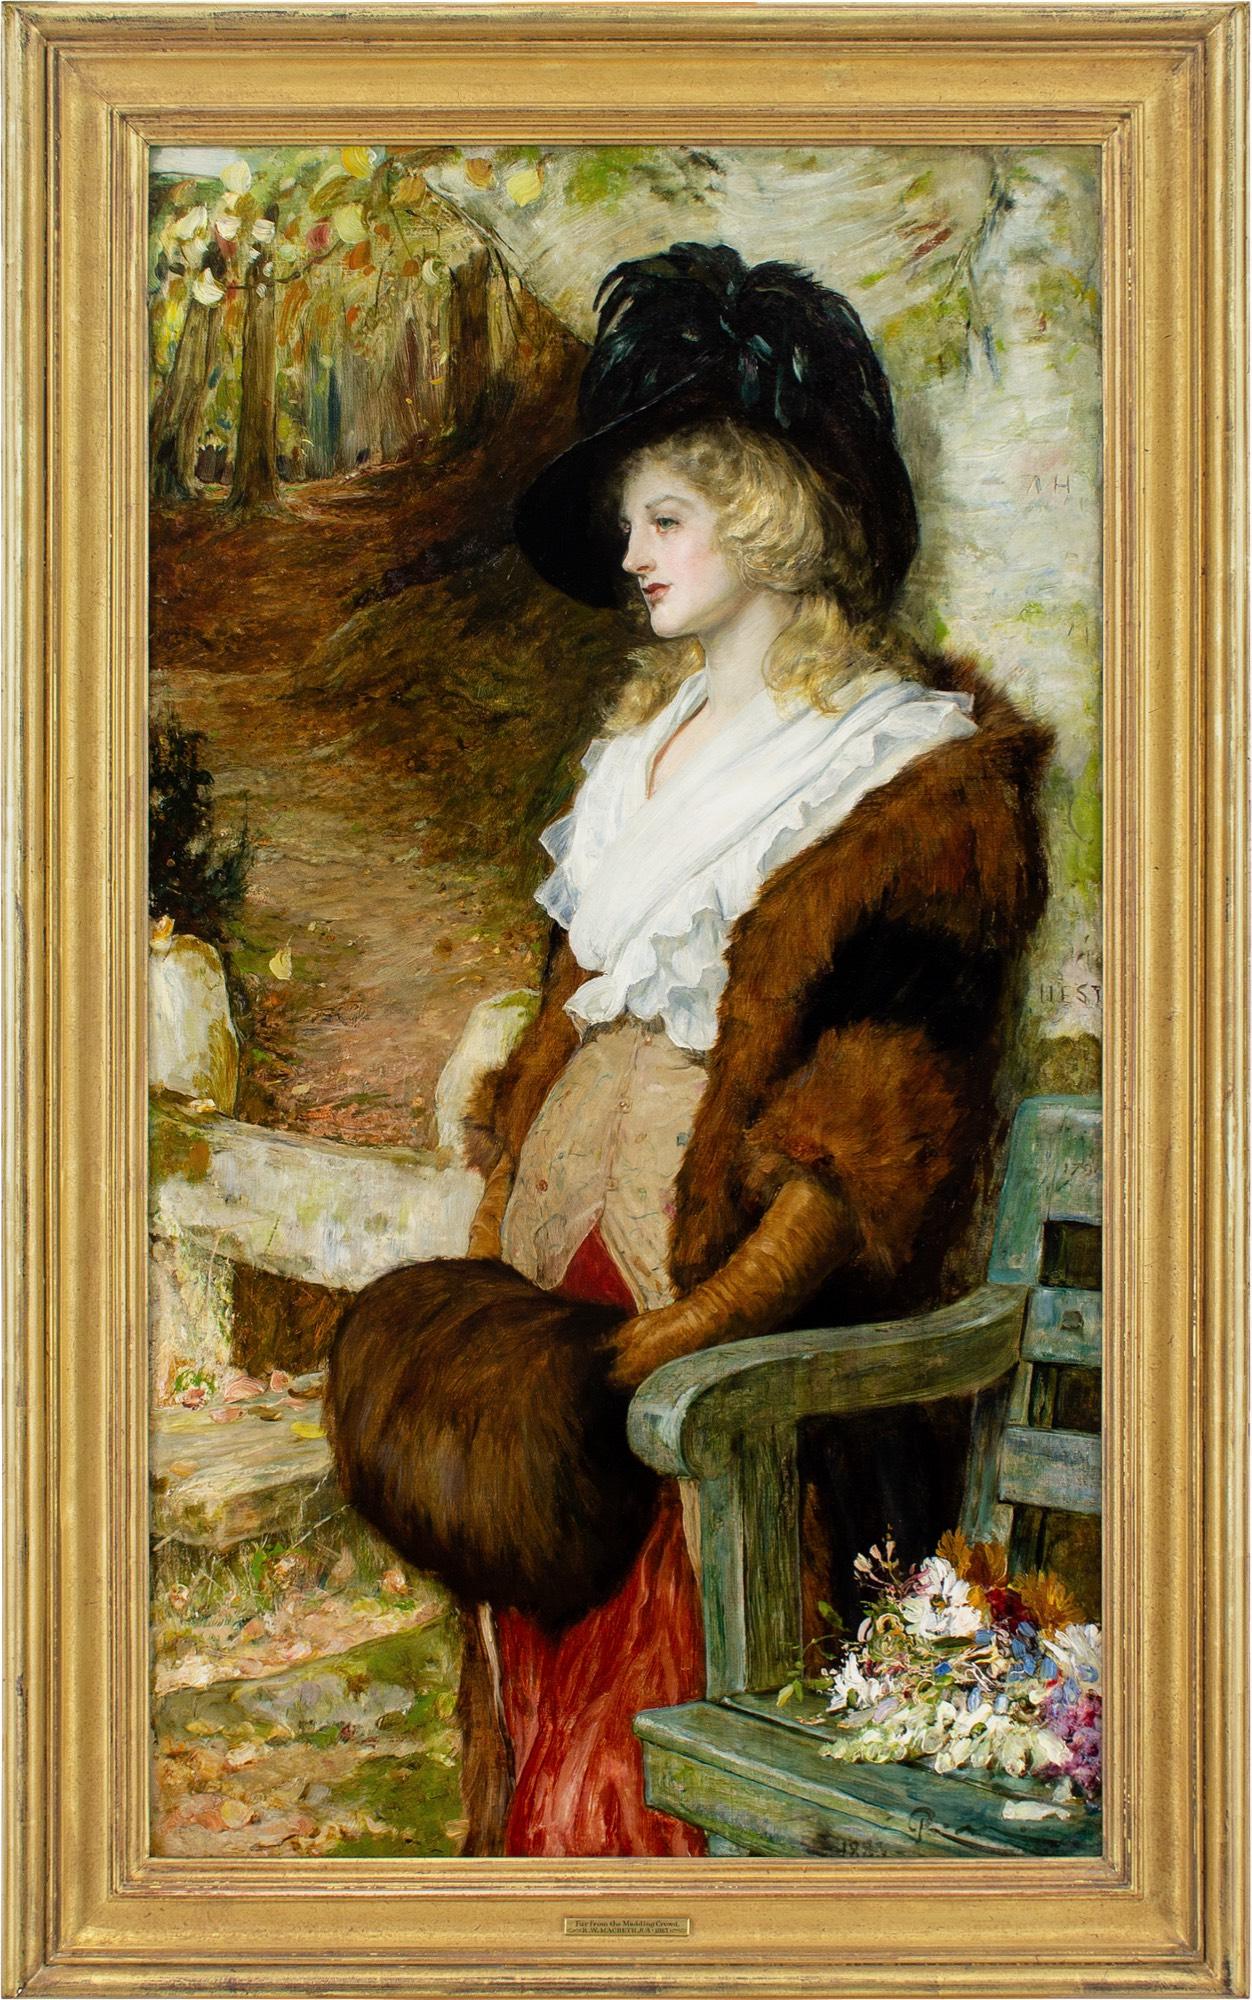 This spellbinding late 19th-century oil painting by Scottish artist Robert Walker Macbeth RA ROI RWS (1848-1910) depicts a young woman wearing a white pelerine and a jacket trimmed with fur while leaning against a tree by the entrance to a wood. It